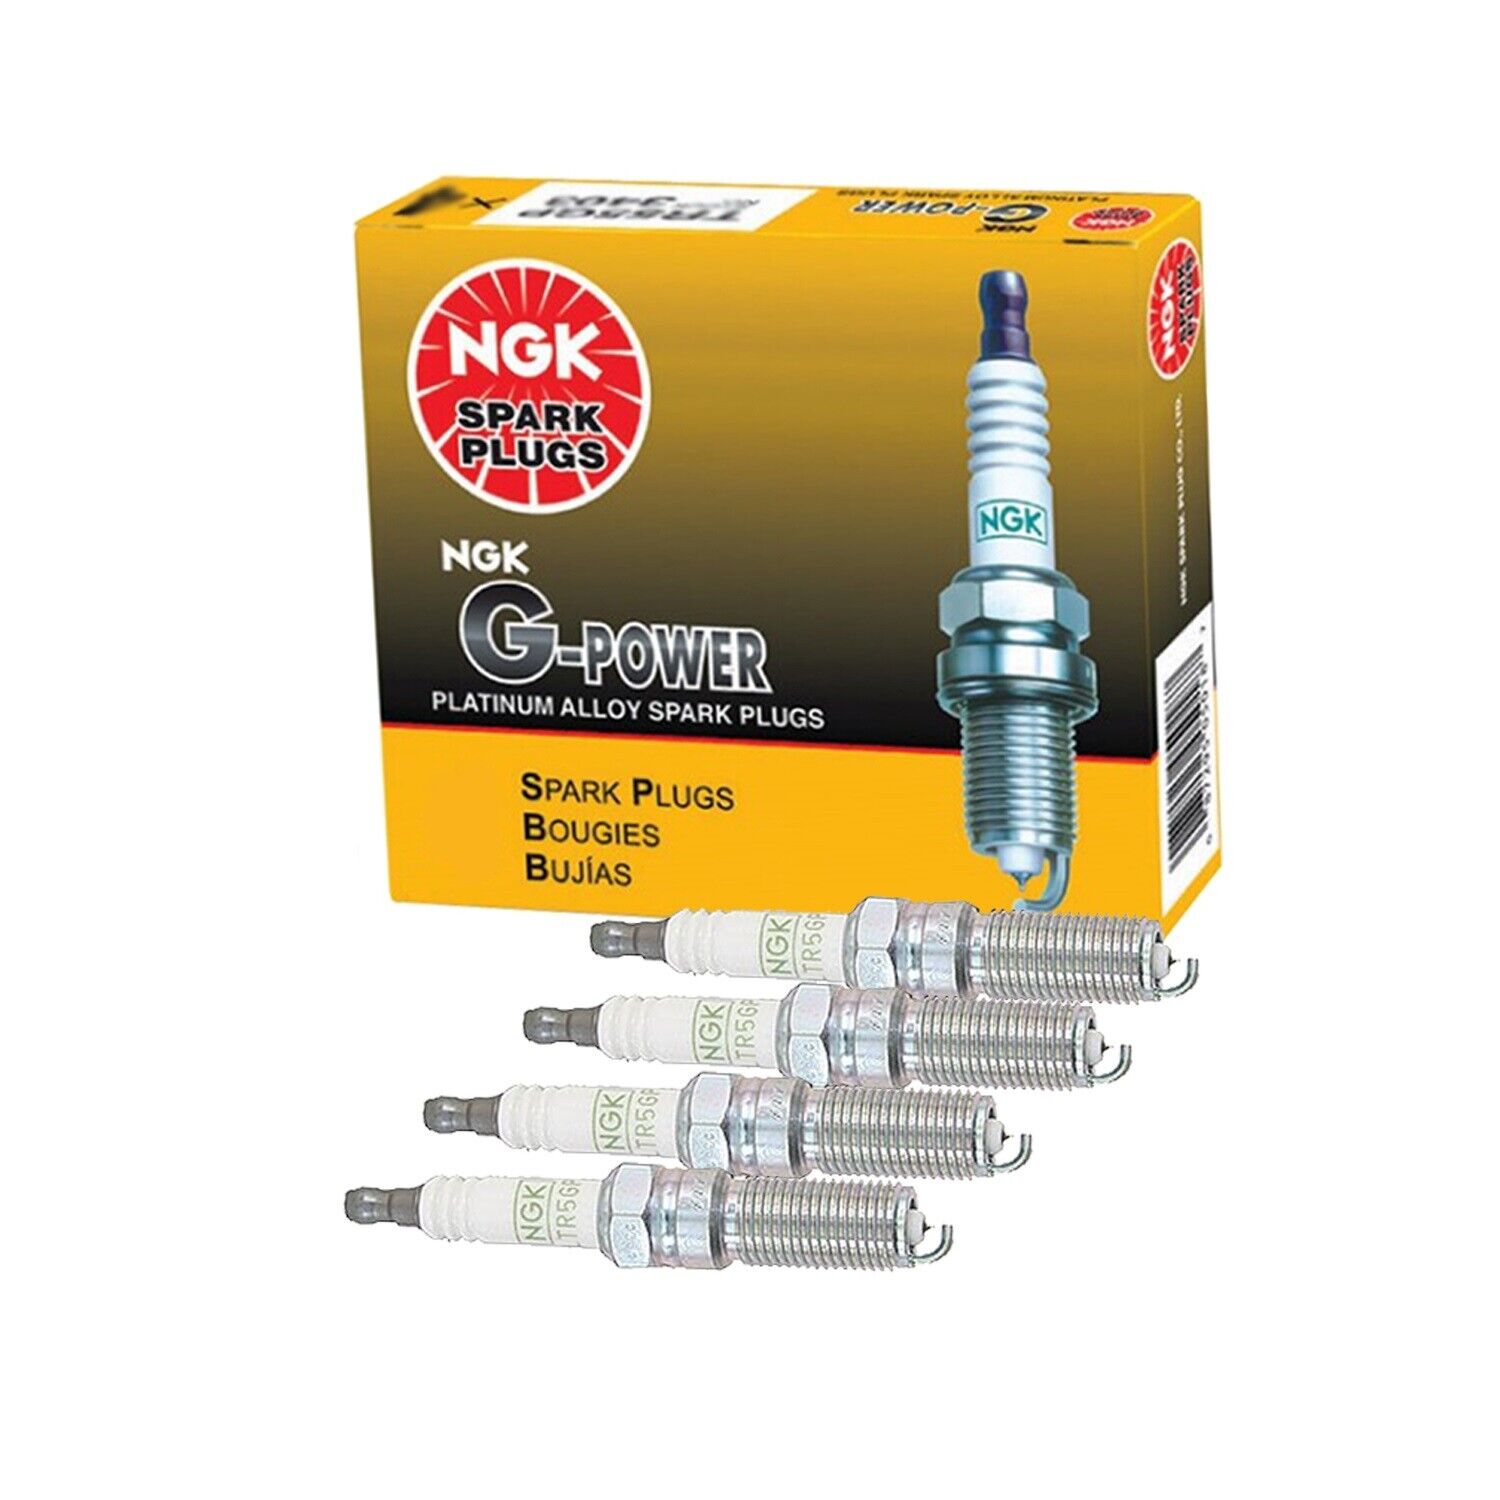 NGK Set of 4 G-Power Platinum Spark Plugs For Buick Chevy Ford GMC Saturn L4